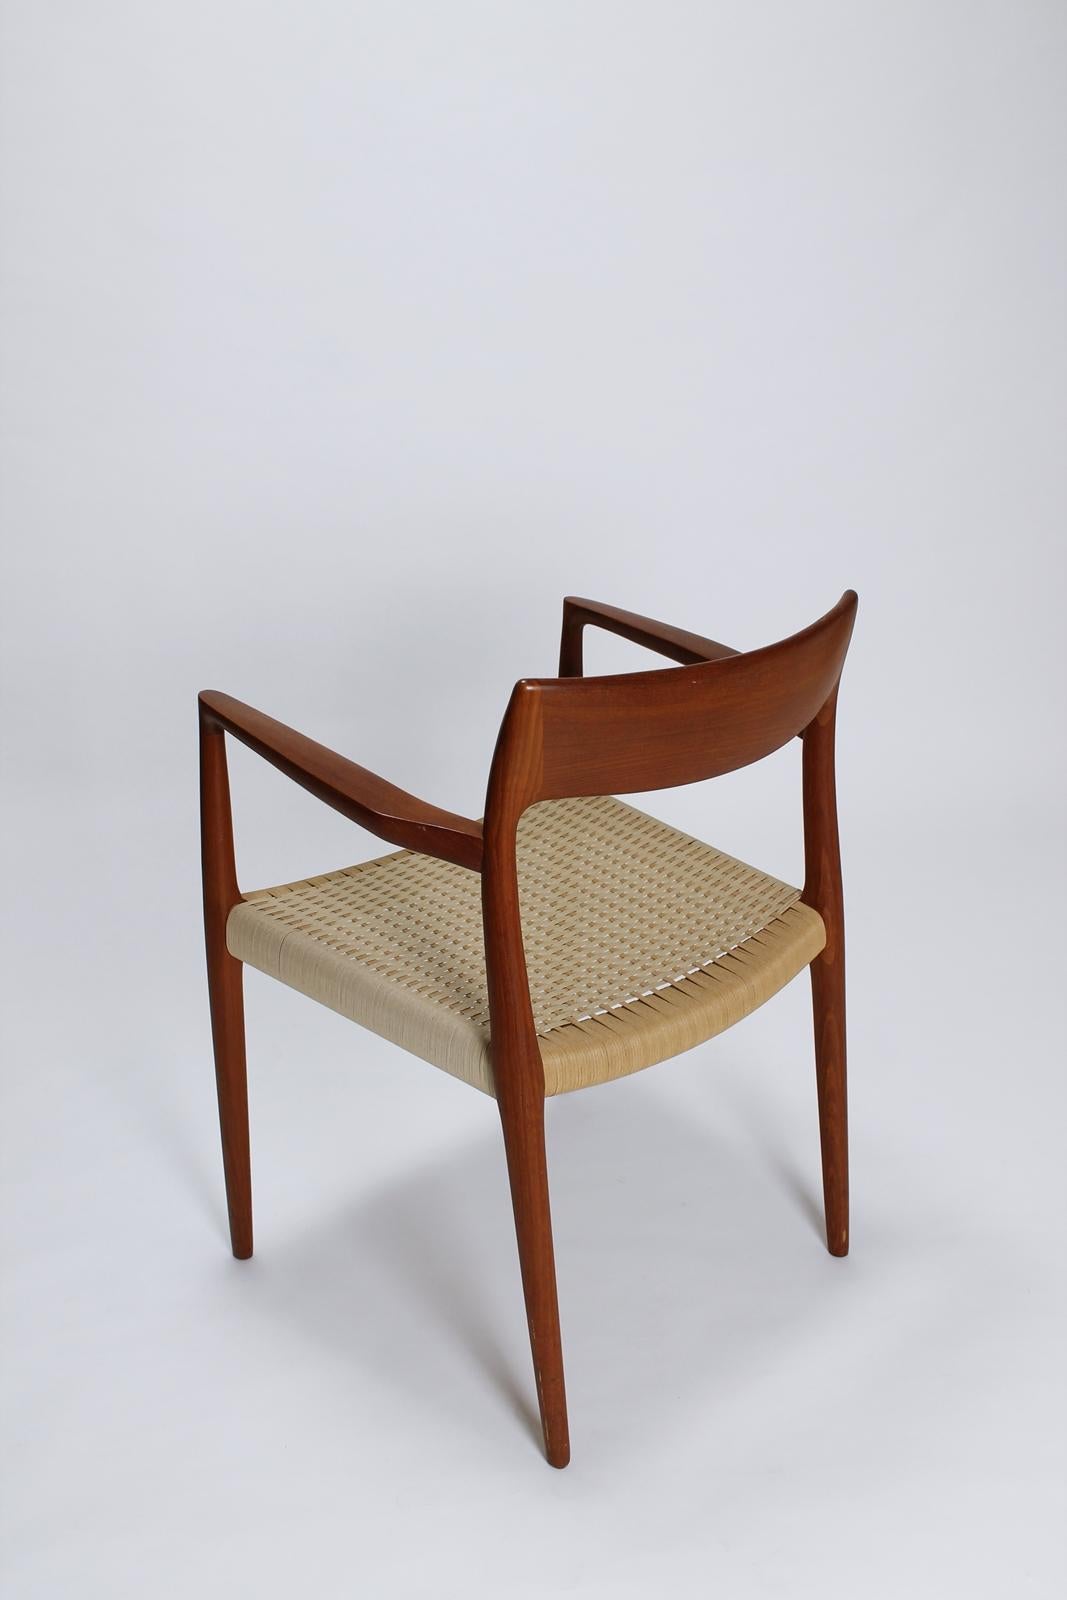 Danish Mod. 57 Teak Armchair by Niels Otto Möller for J. L Mollers, 1960s